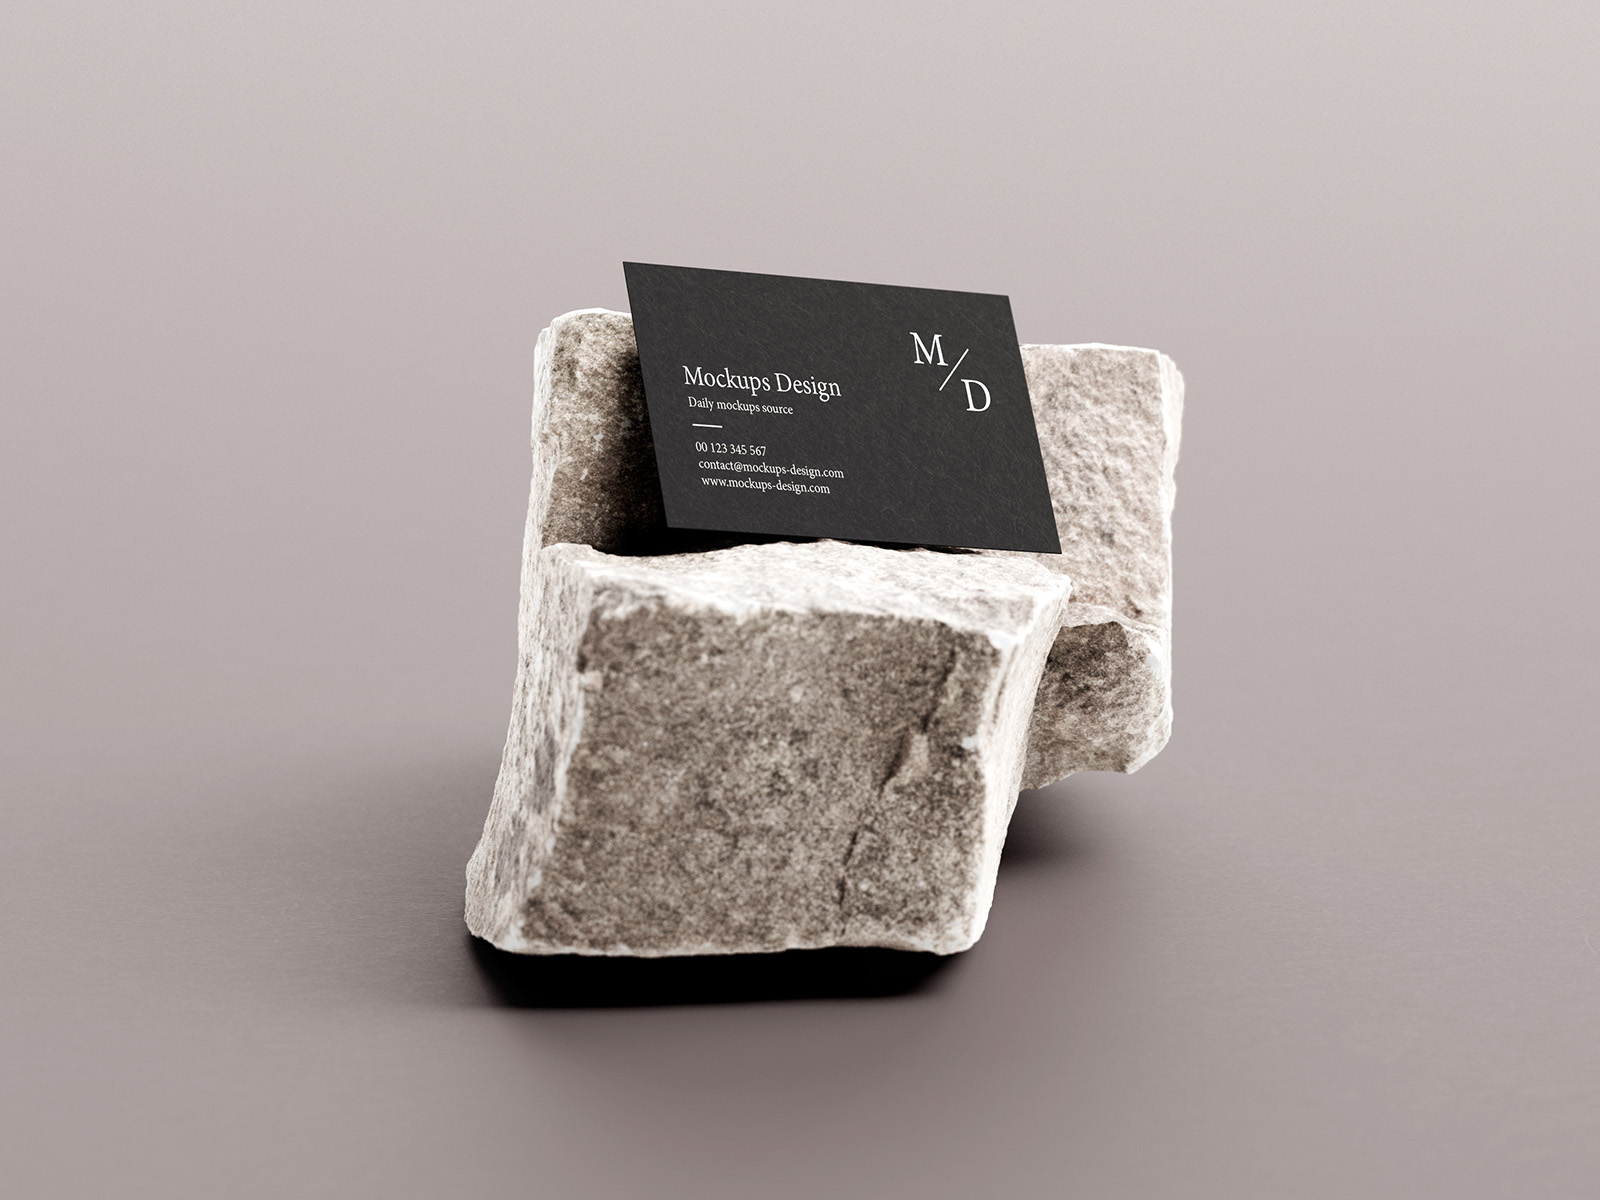 3,5x2 inches business cards on stone mockup